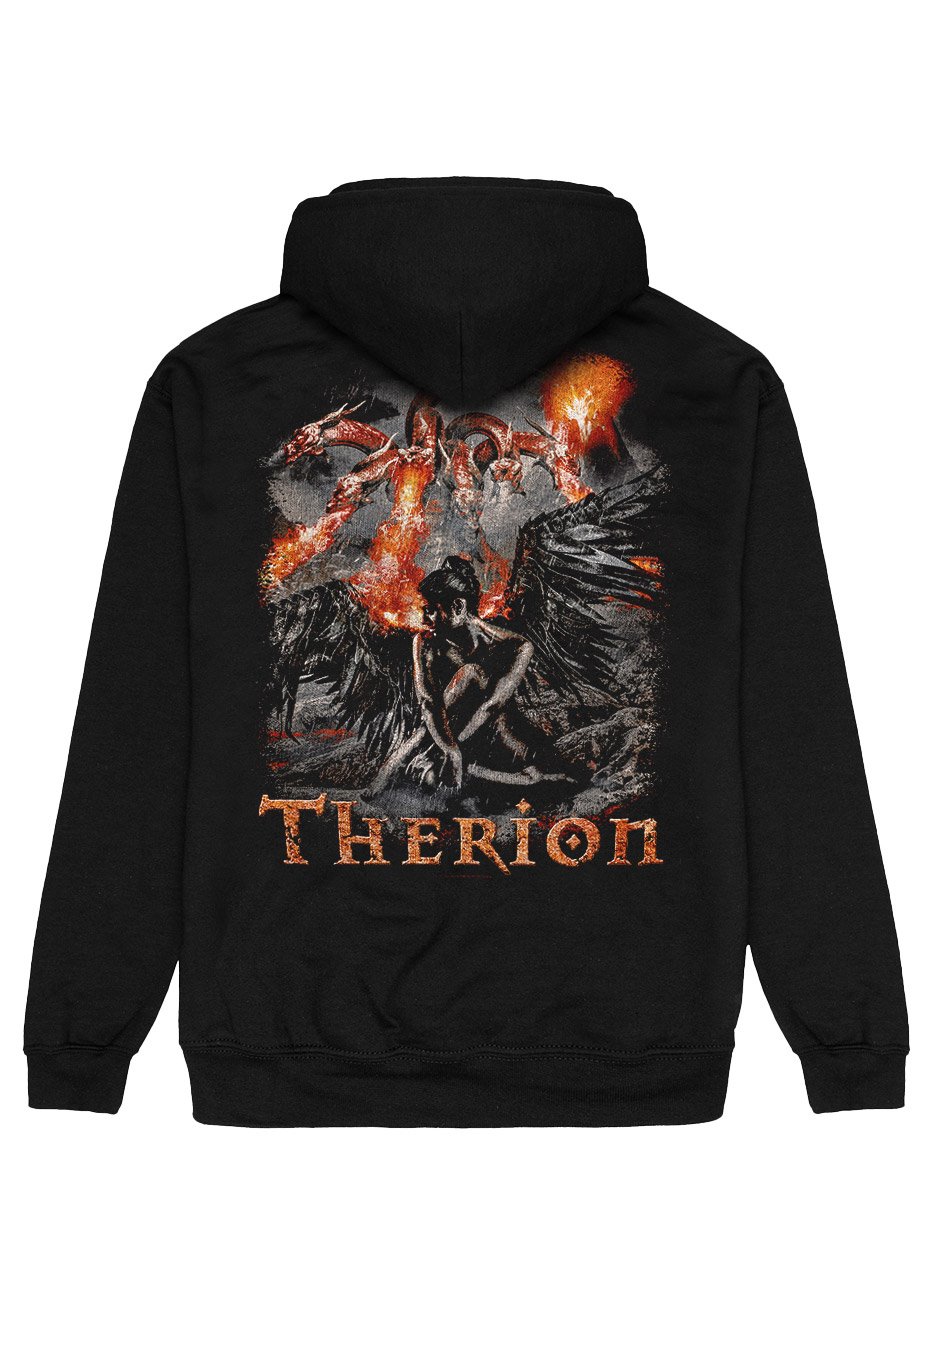 Therion - Leviathan II - Zipper